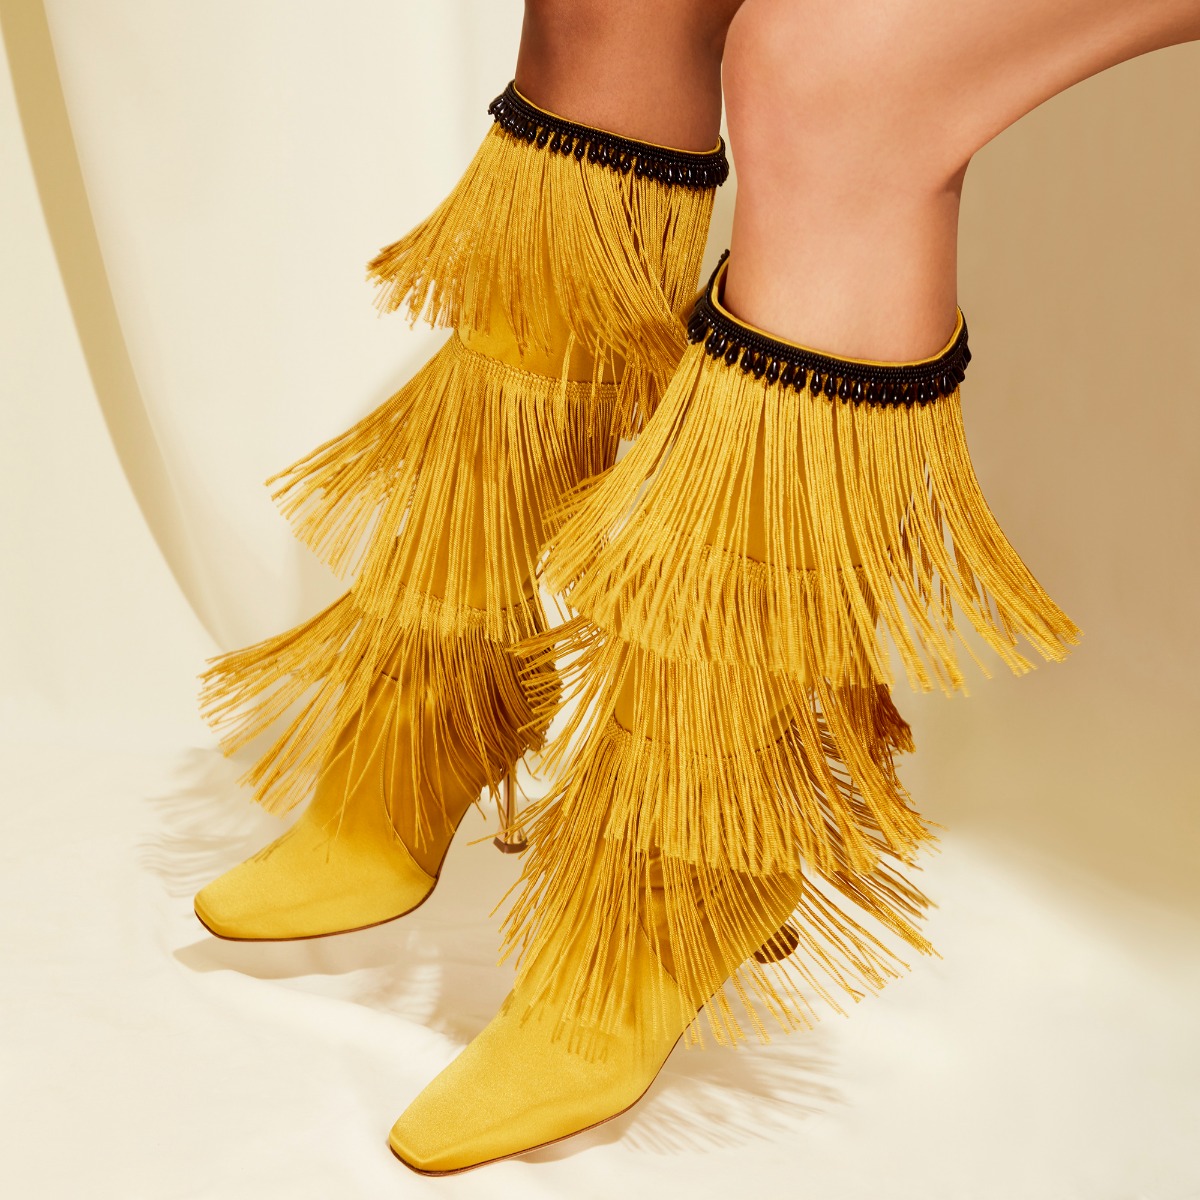 Editorial image of the FLEQUILLOHI boot with two models showcasing the beautiful fringe detailing.